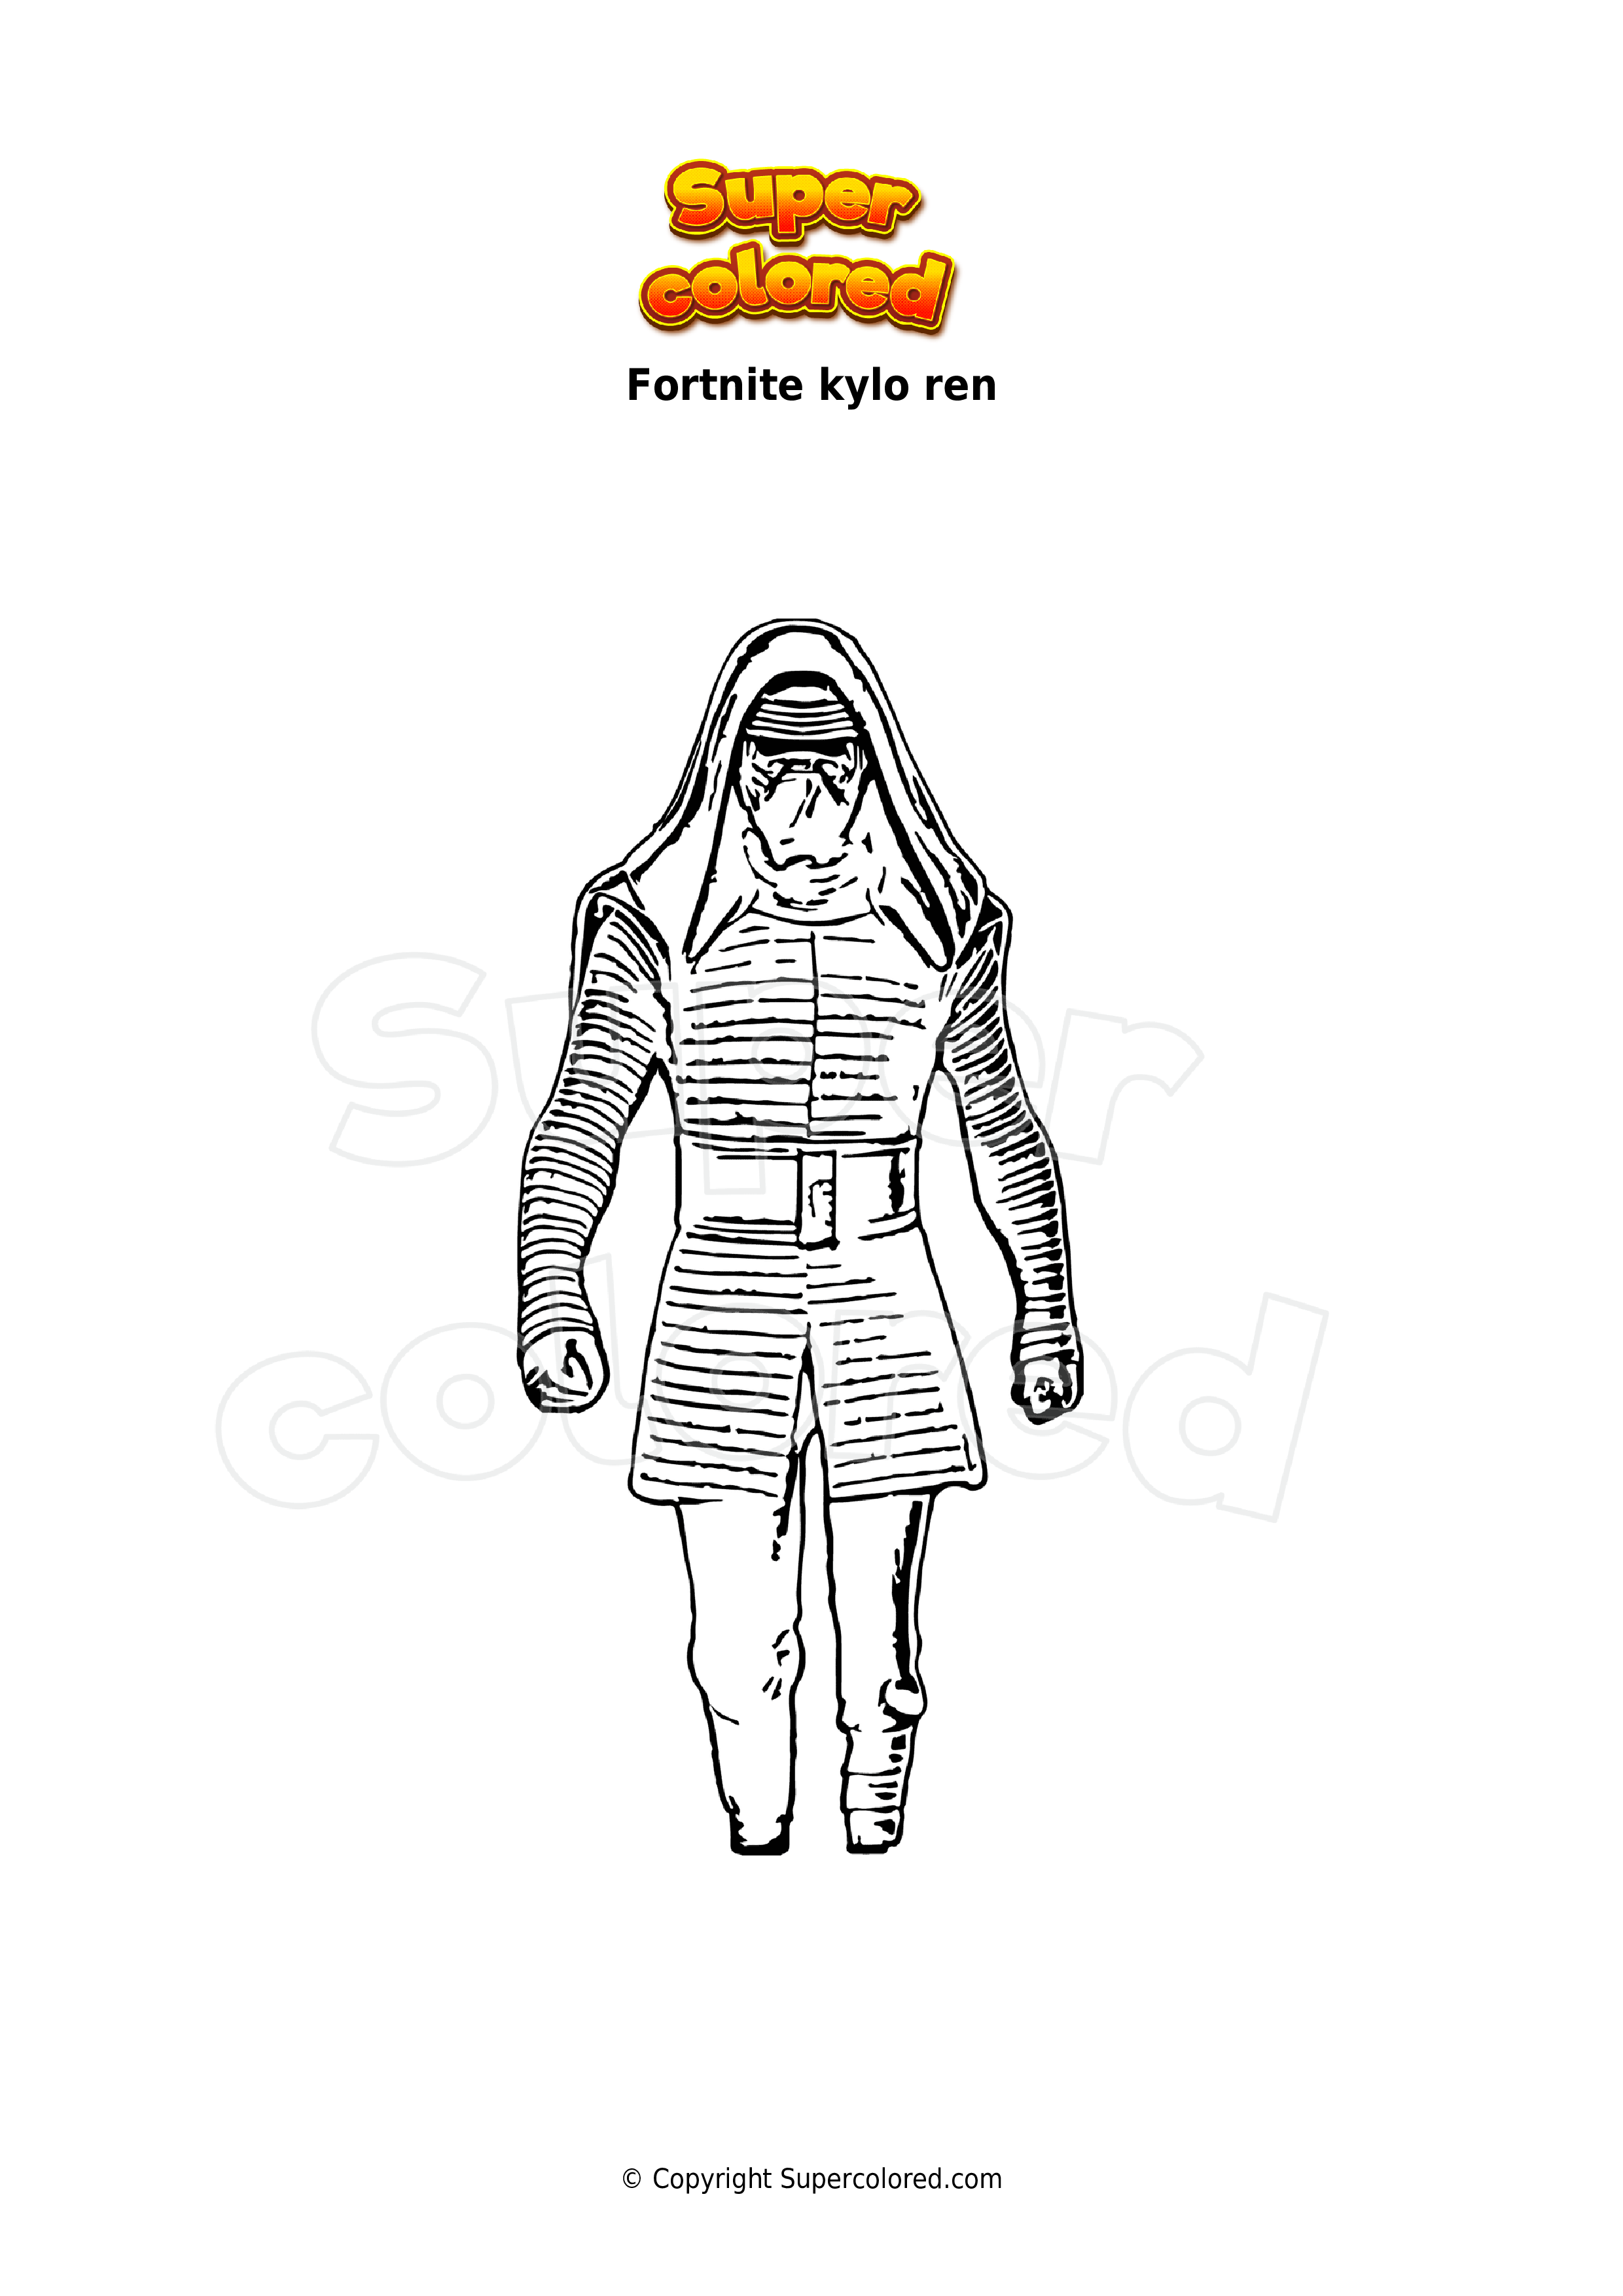 Coloring page fortnite kylo ren